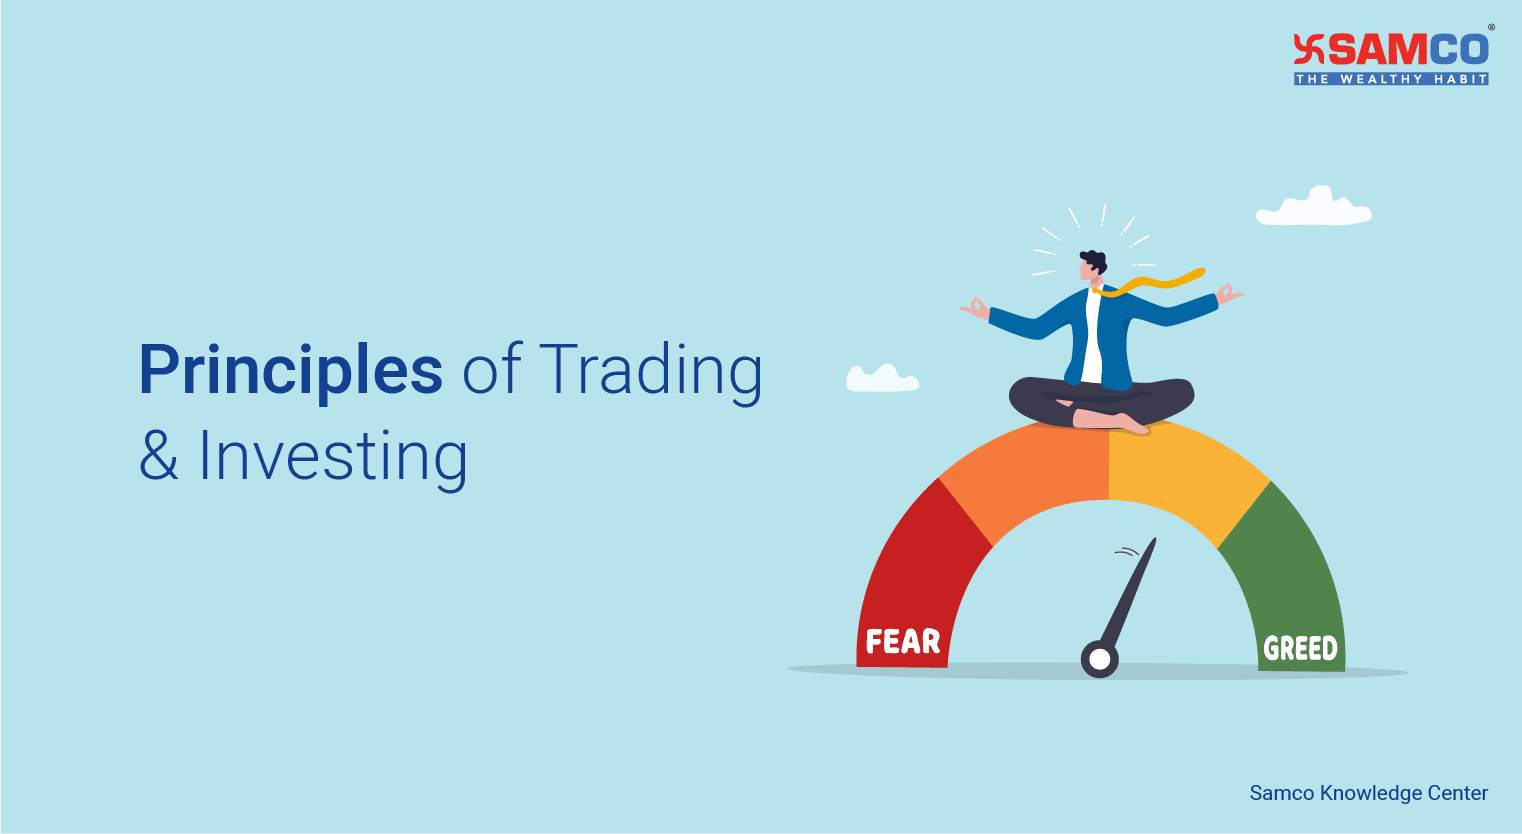 Principles of Trading & Investing